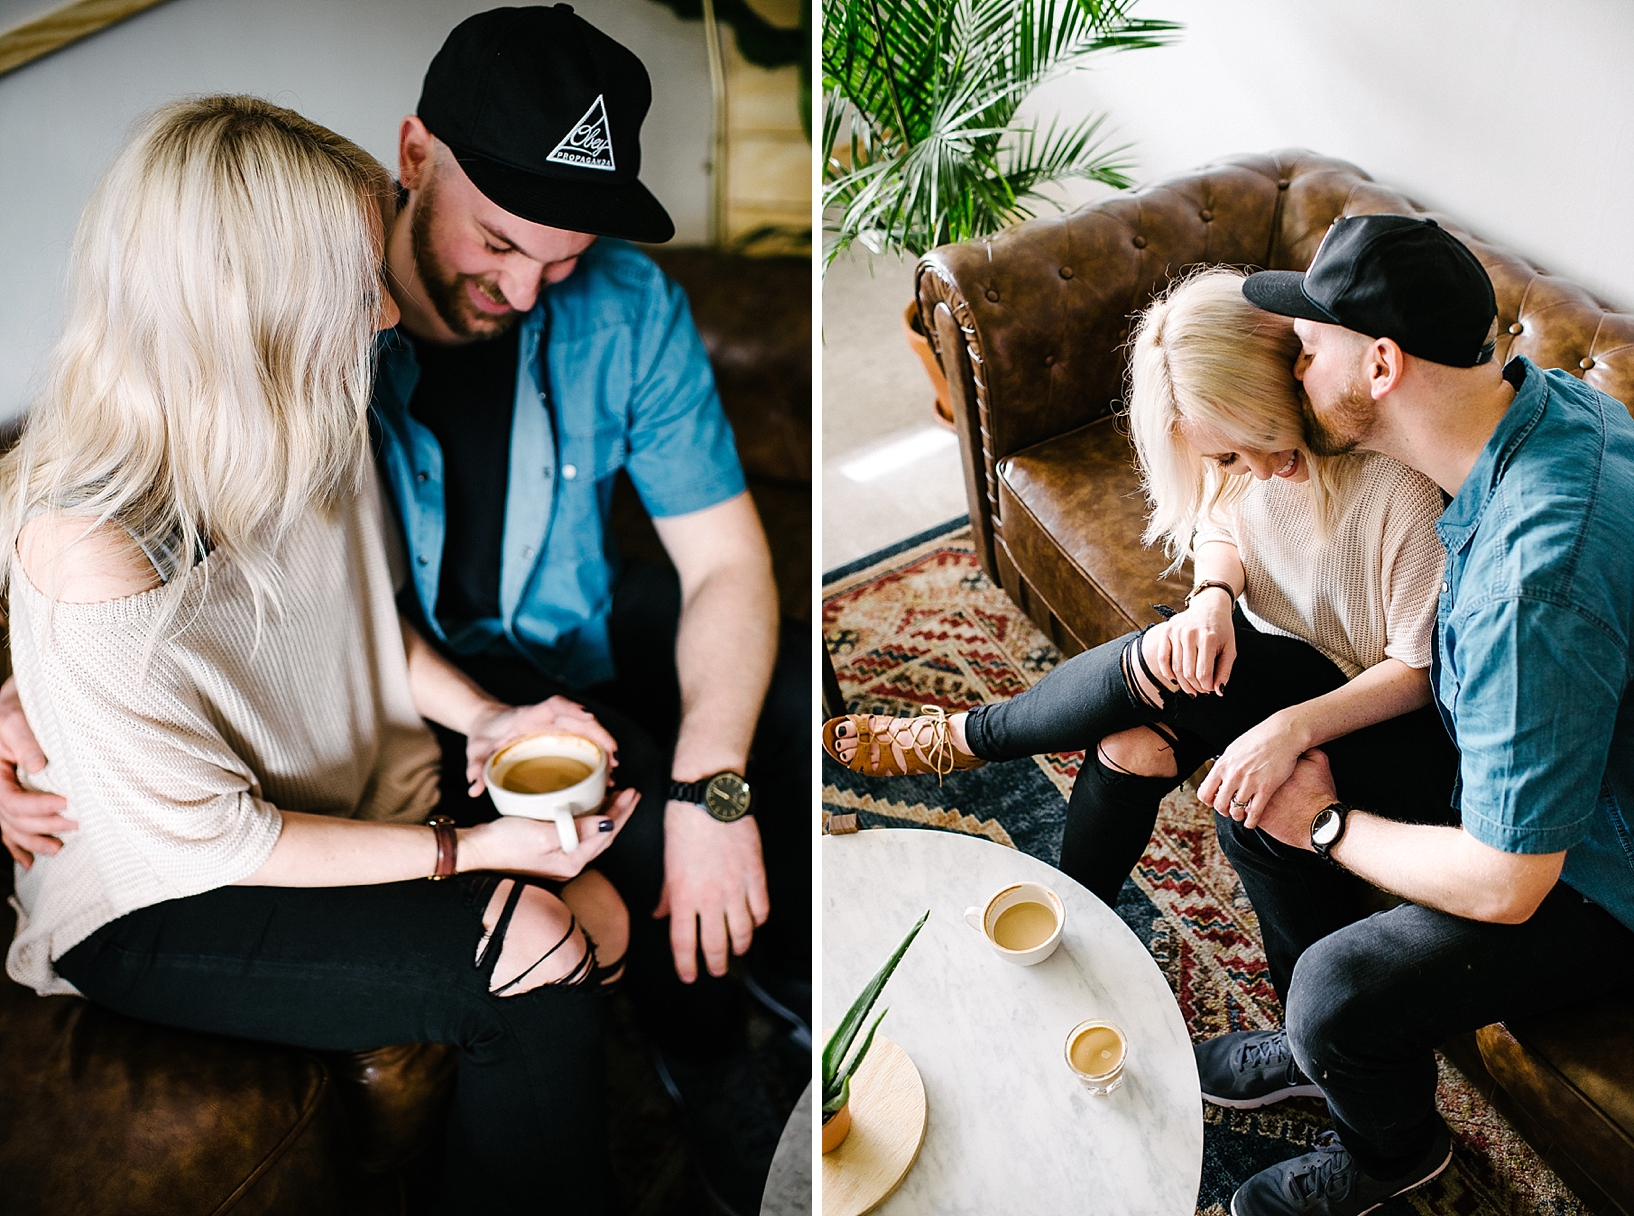 man in denim shirt and baseball hat kissing woman with blonde hair on the cheek sitting on couch drinking coffee